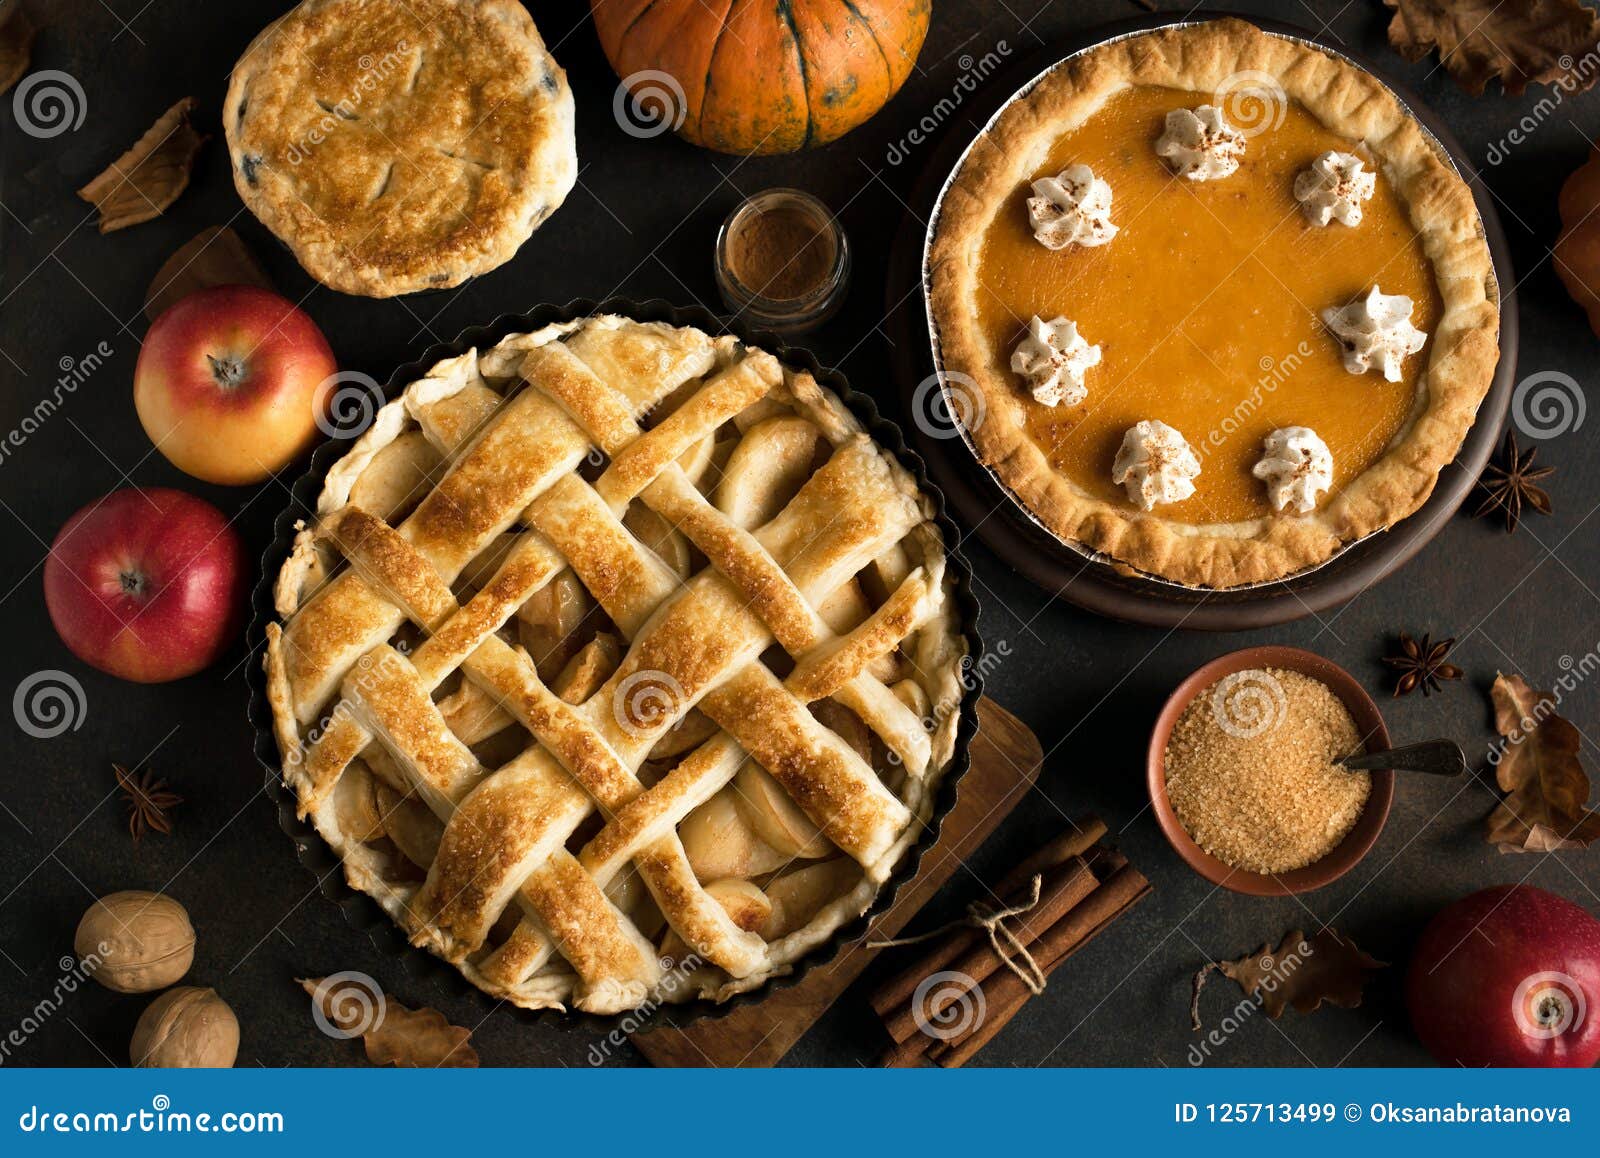 thanksgiving pumpkin and apple pies